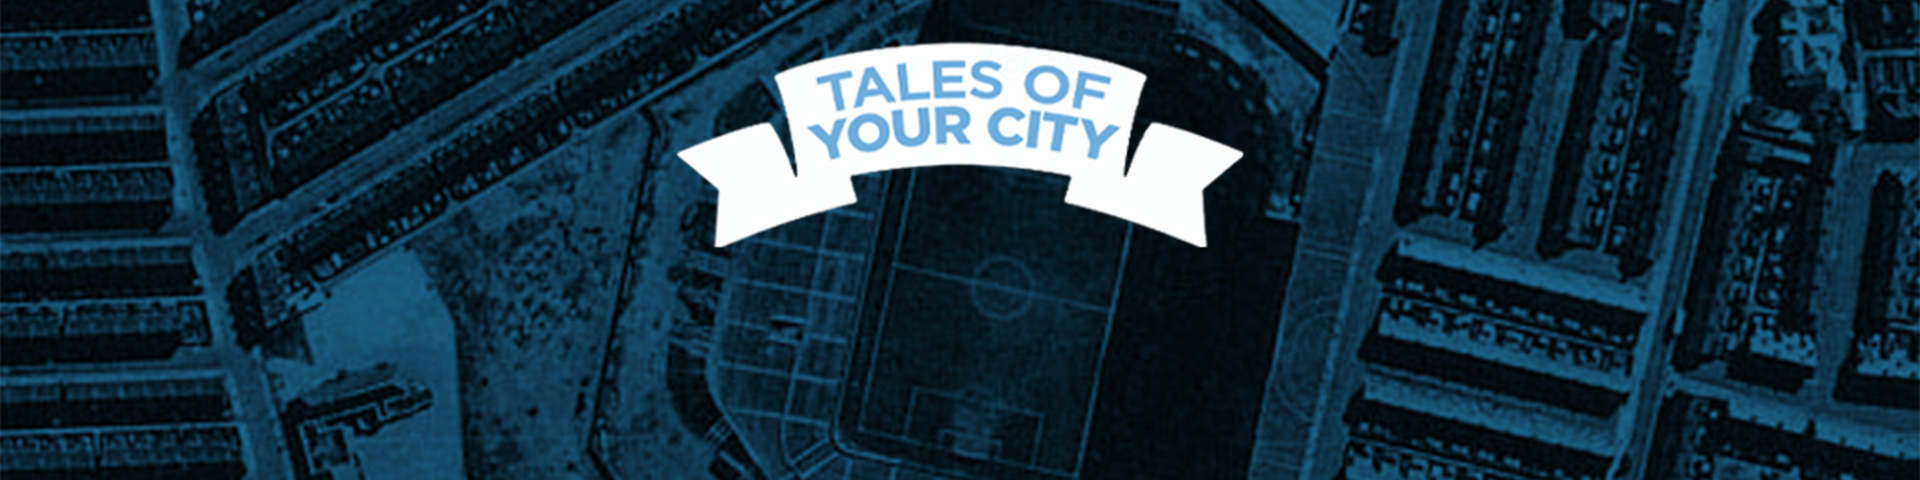 Tales of Your City